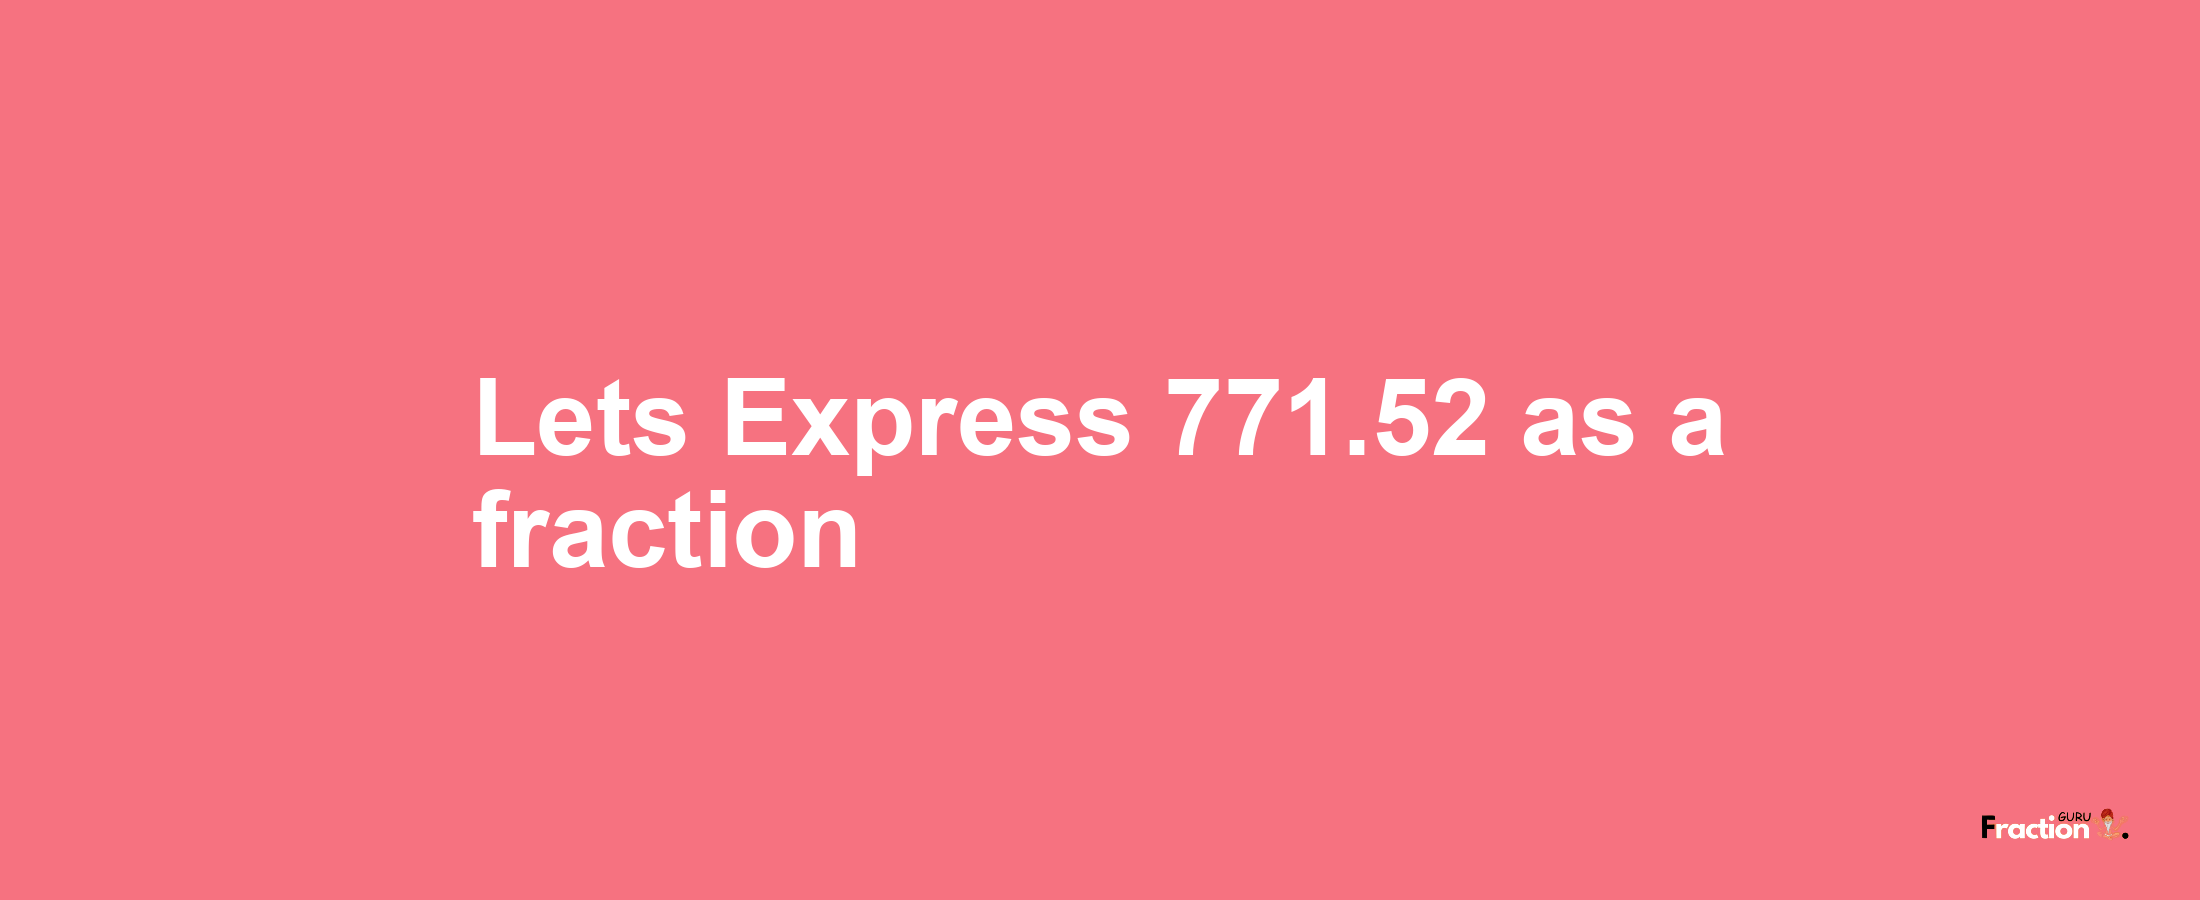 Lets Express 771.52 as afraction